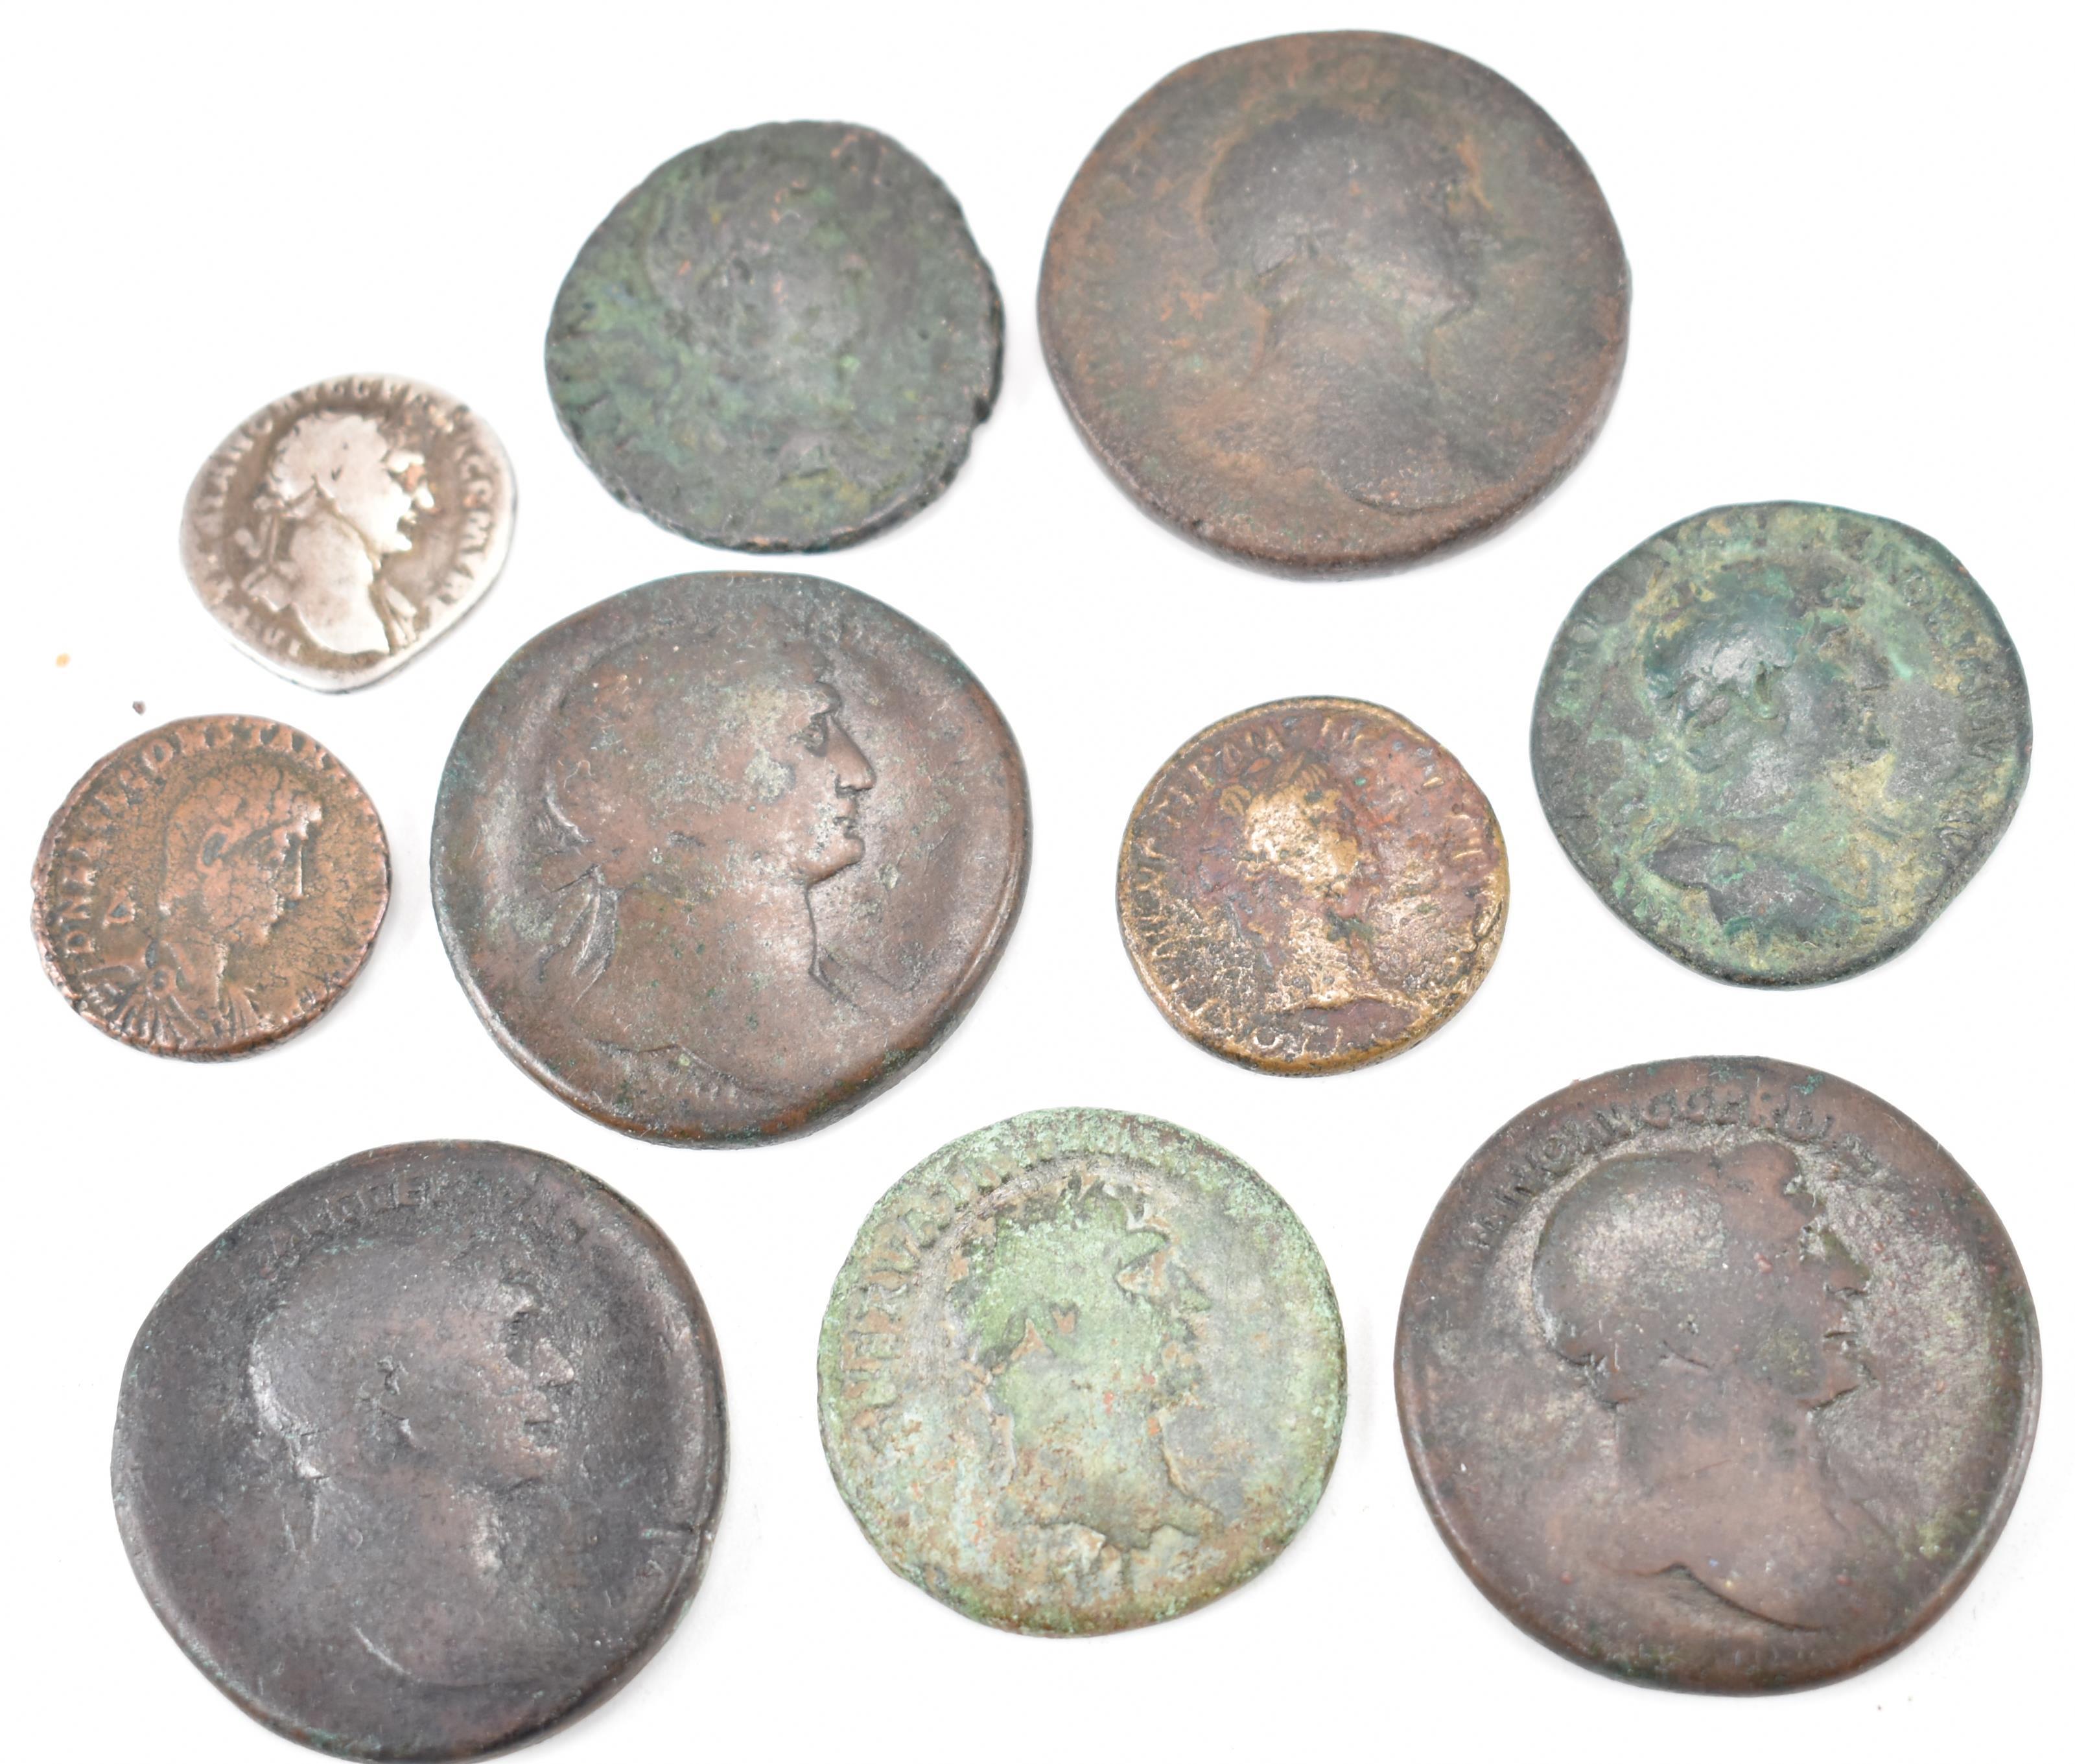 NINE ANCIENT ROMAN IMPERIAL COINS FROM THE REIGN OF TRAJAN